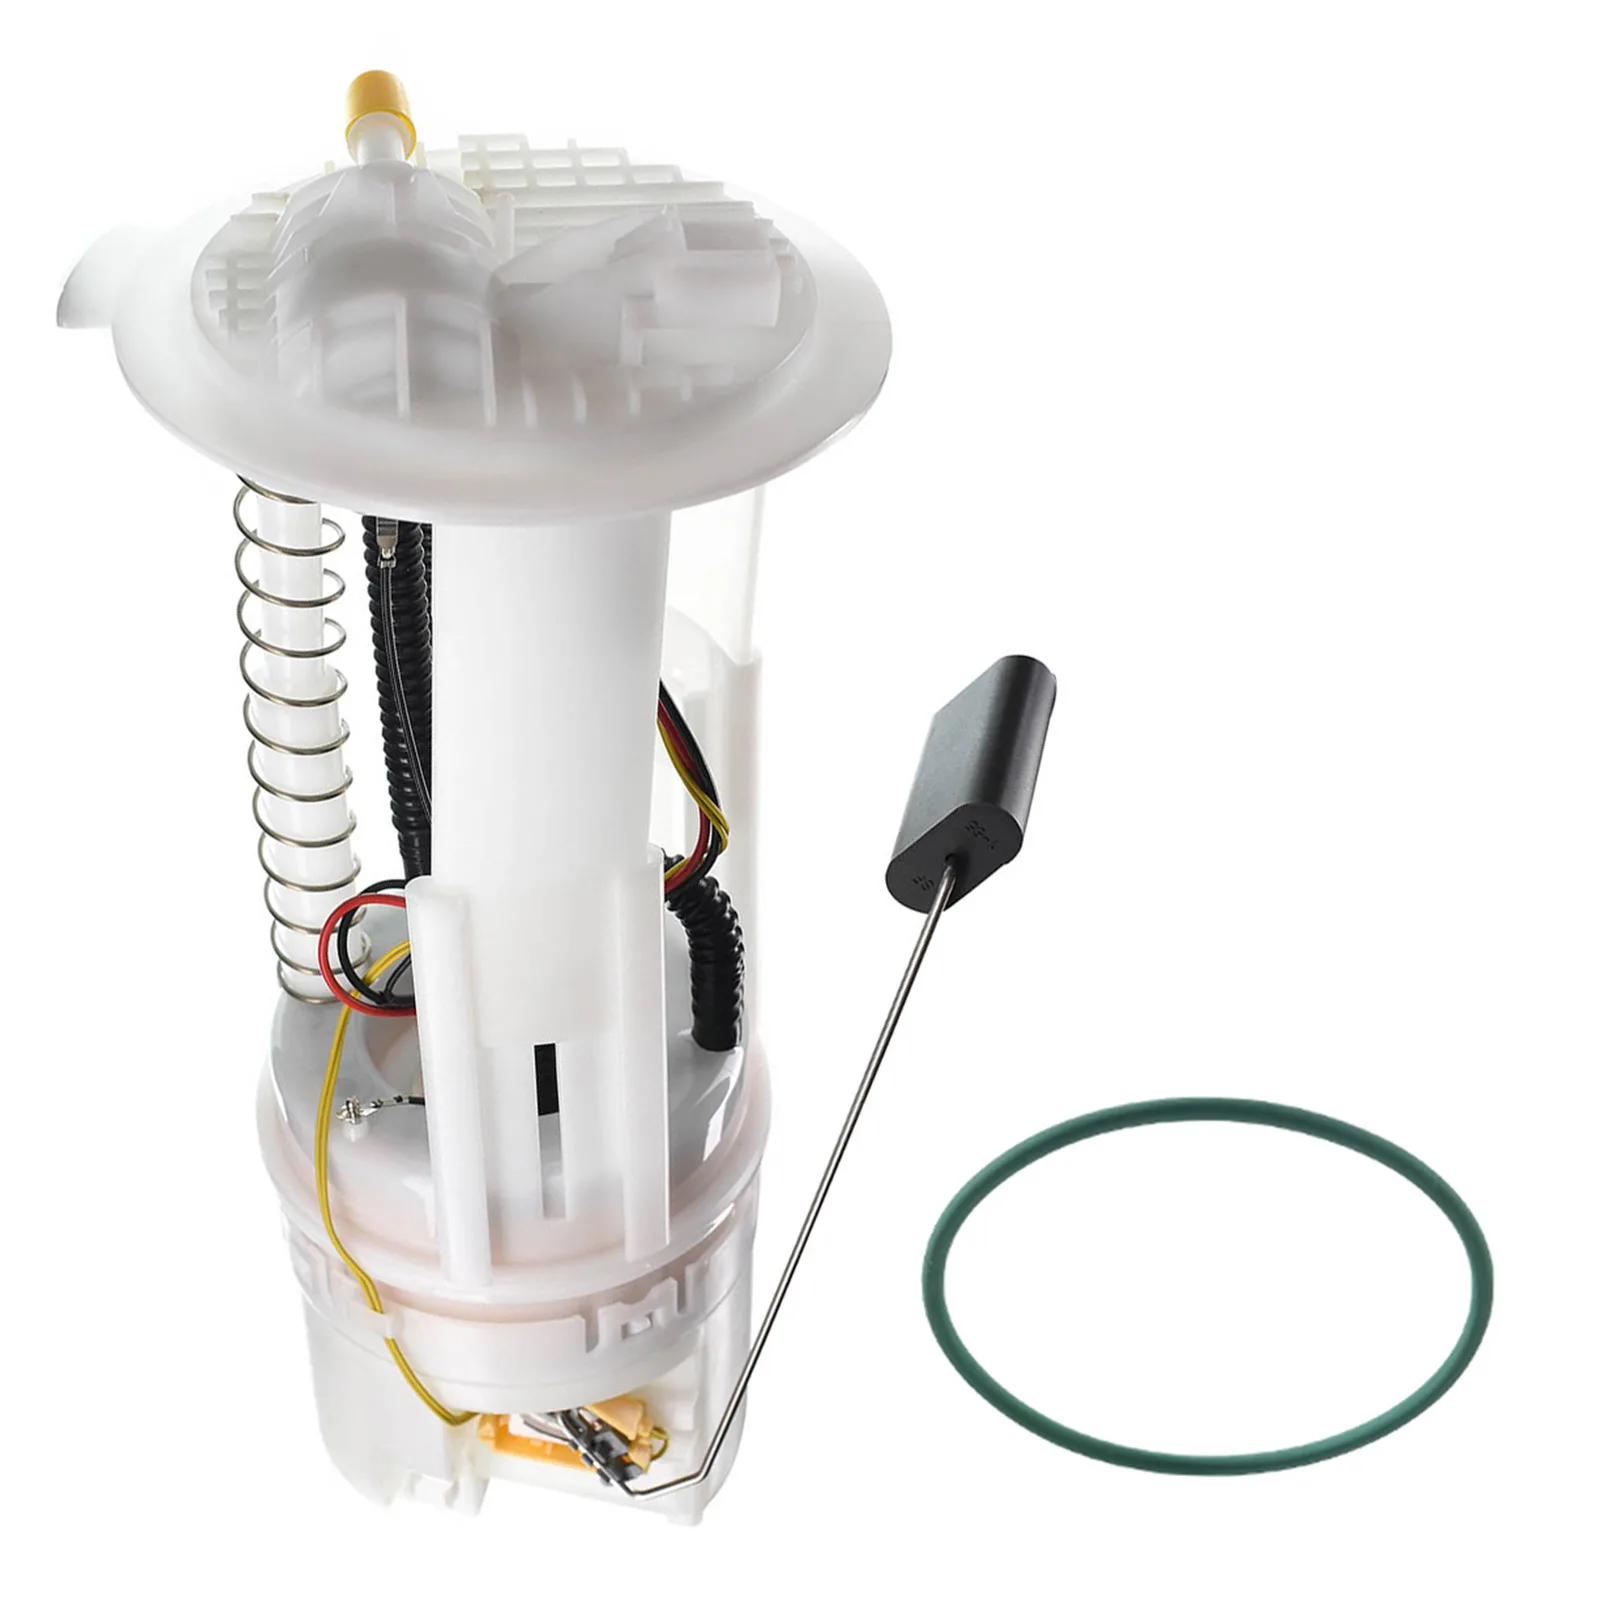 In-stock Cn Us Gmr Au Fuel Pump Module Assembly For Jeep Wrangler Tj 2005-2006  I4  I6  E7200m 5161335ae - Buy Fuel Pump Product on 